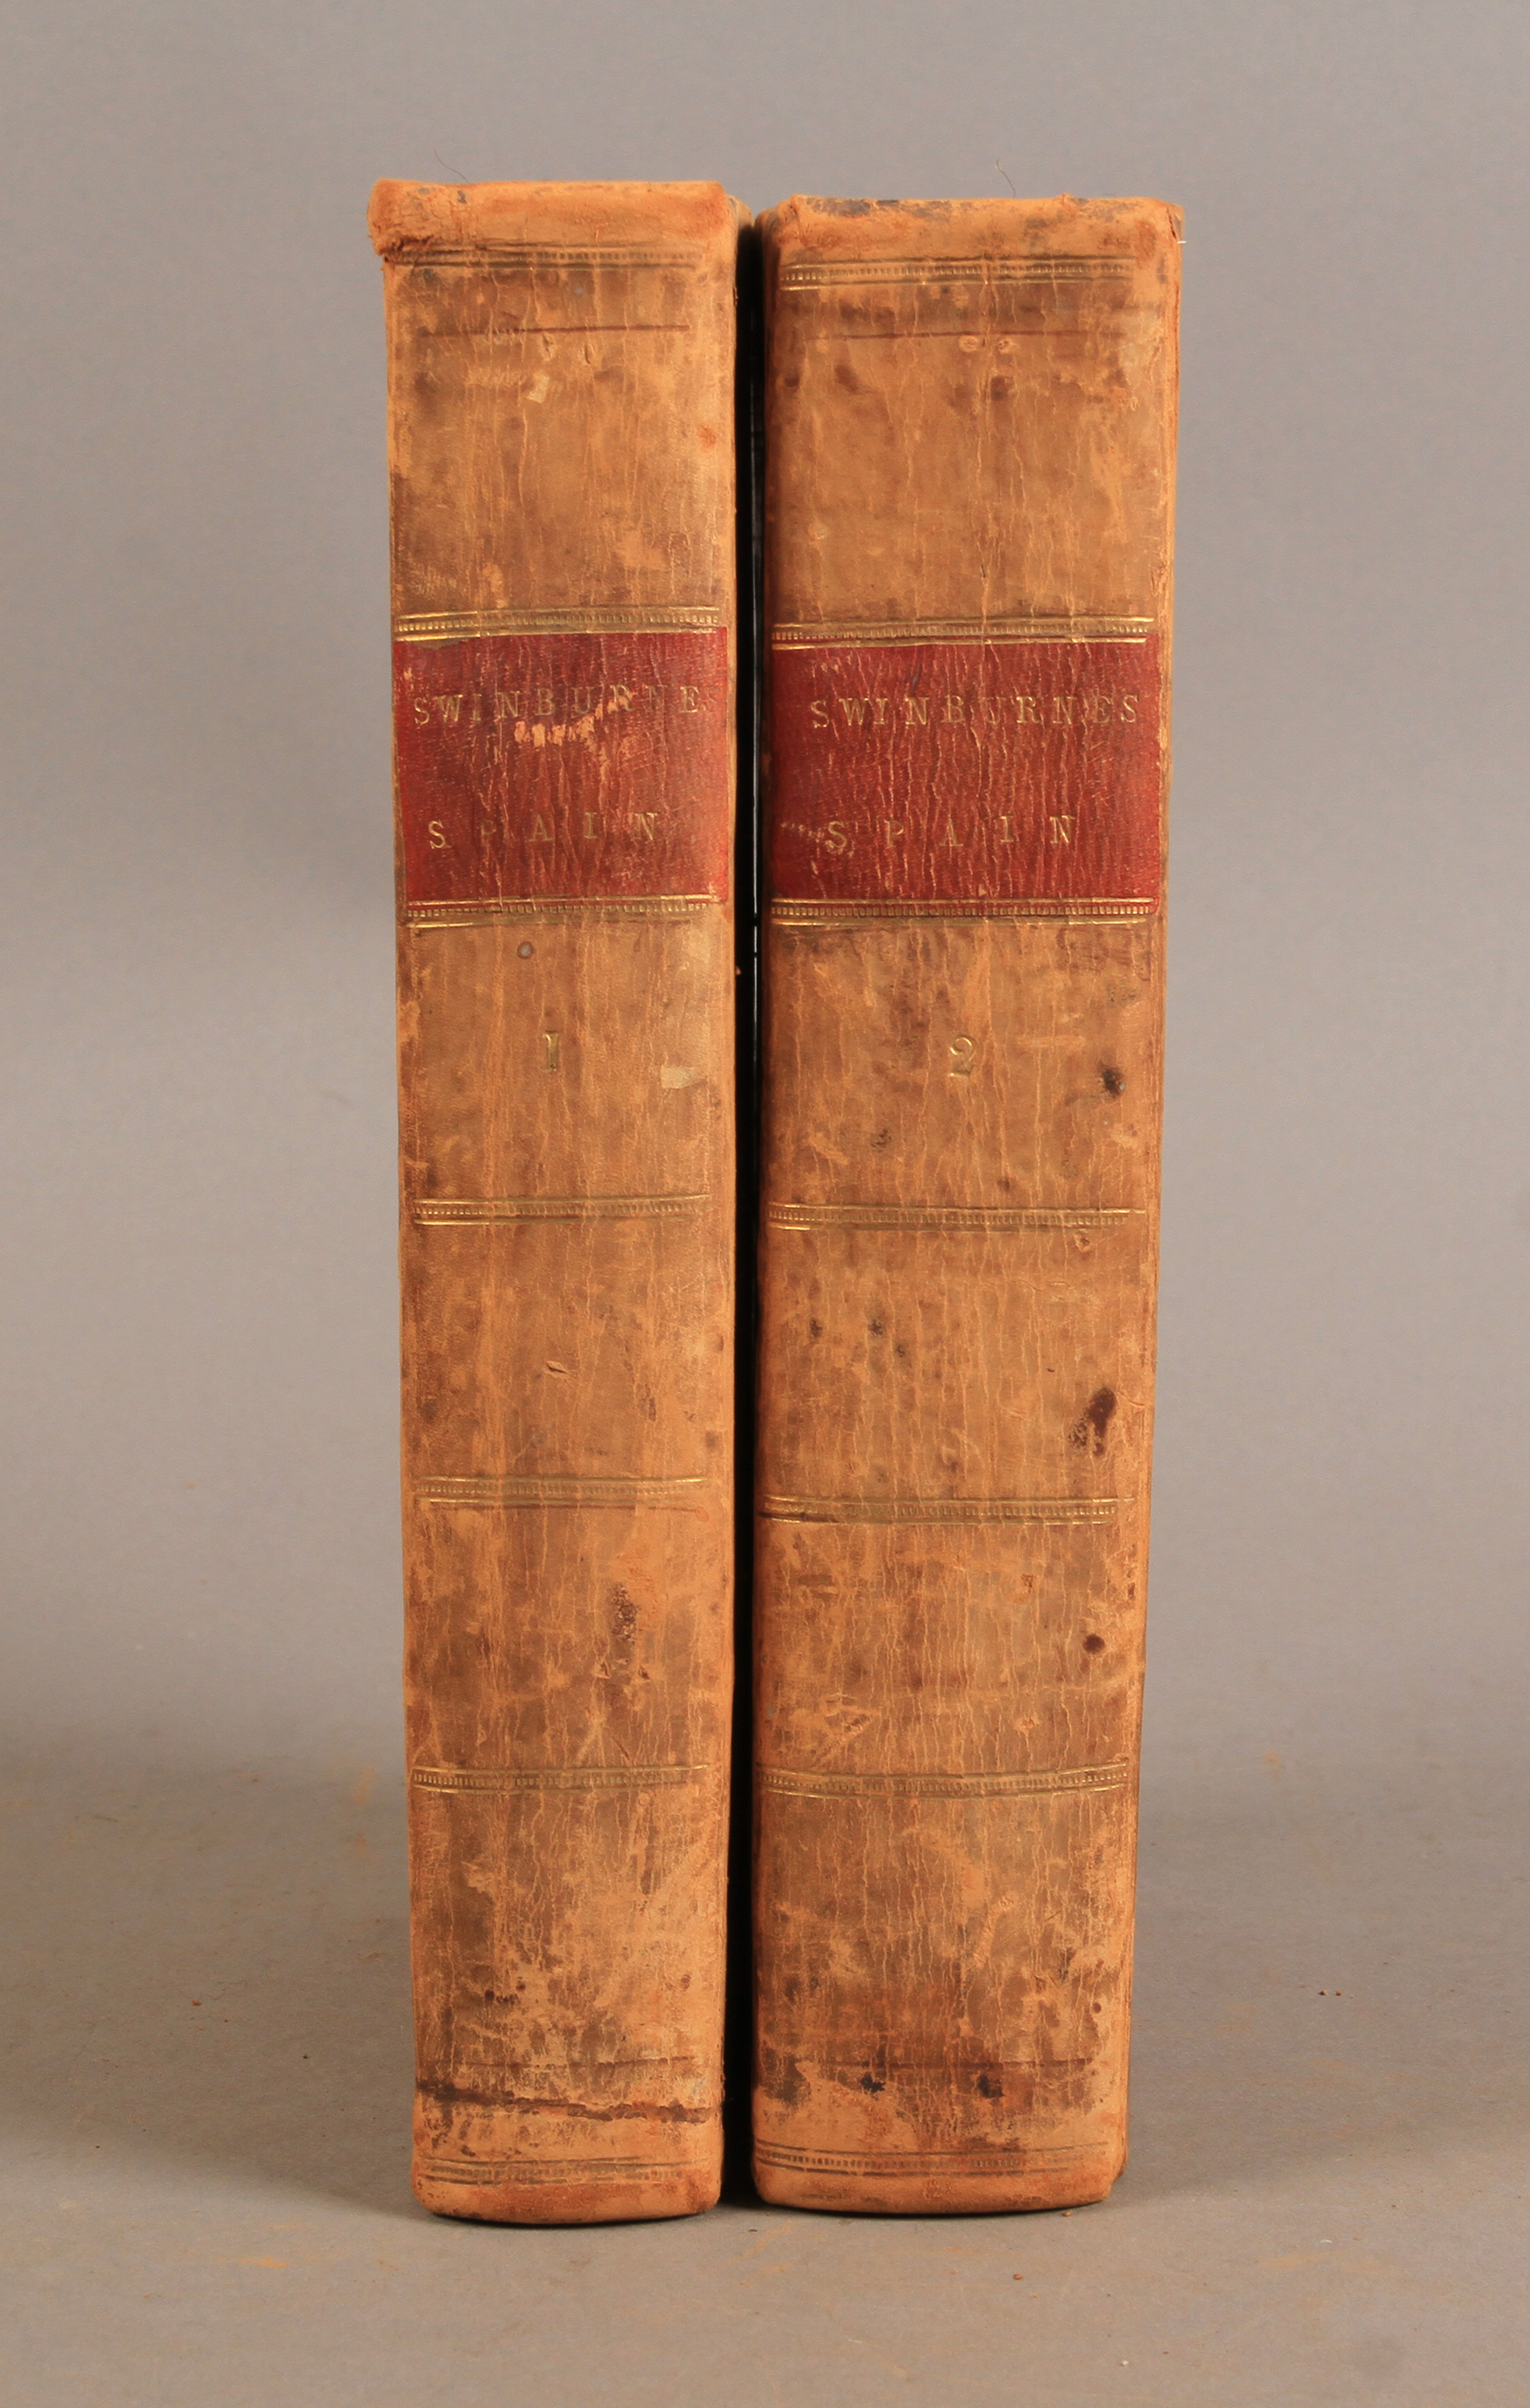 Swinburne, Henry, Travels Through Spain in the Years 1775 and 1776. London, J Davis, 1787. Second